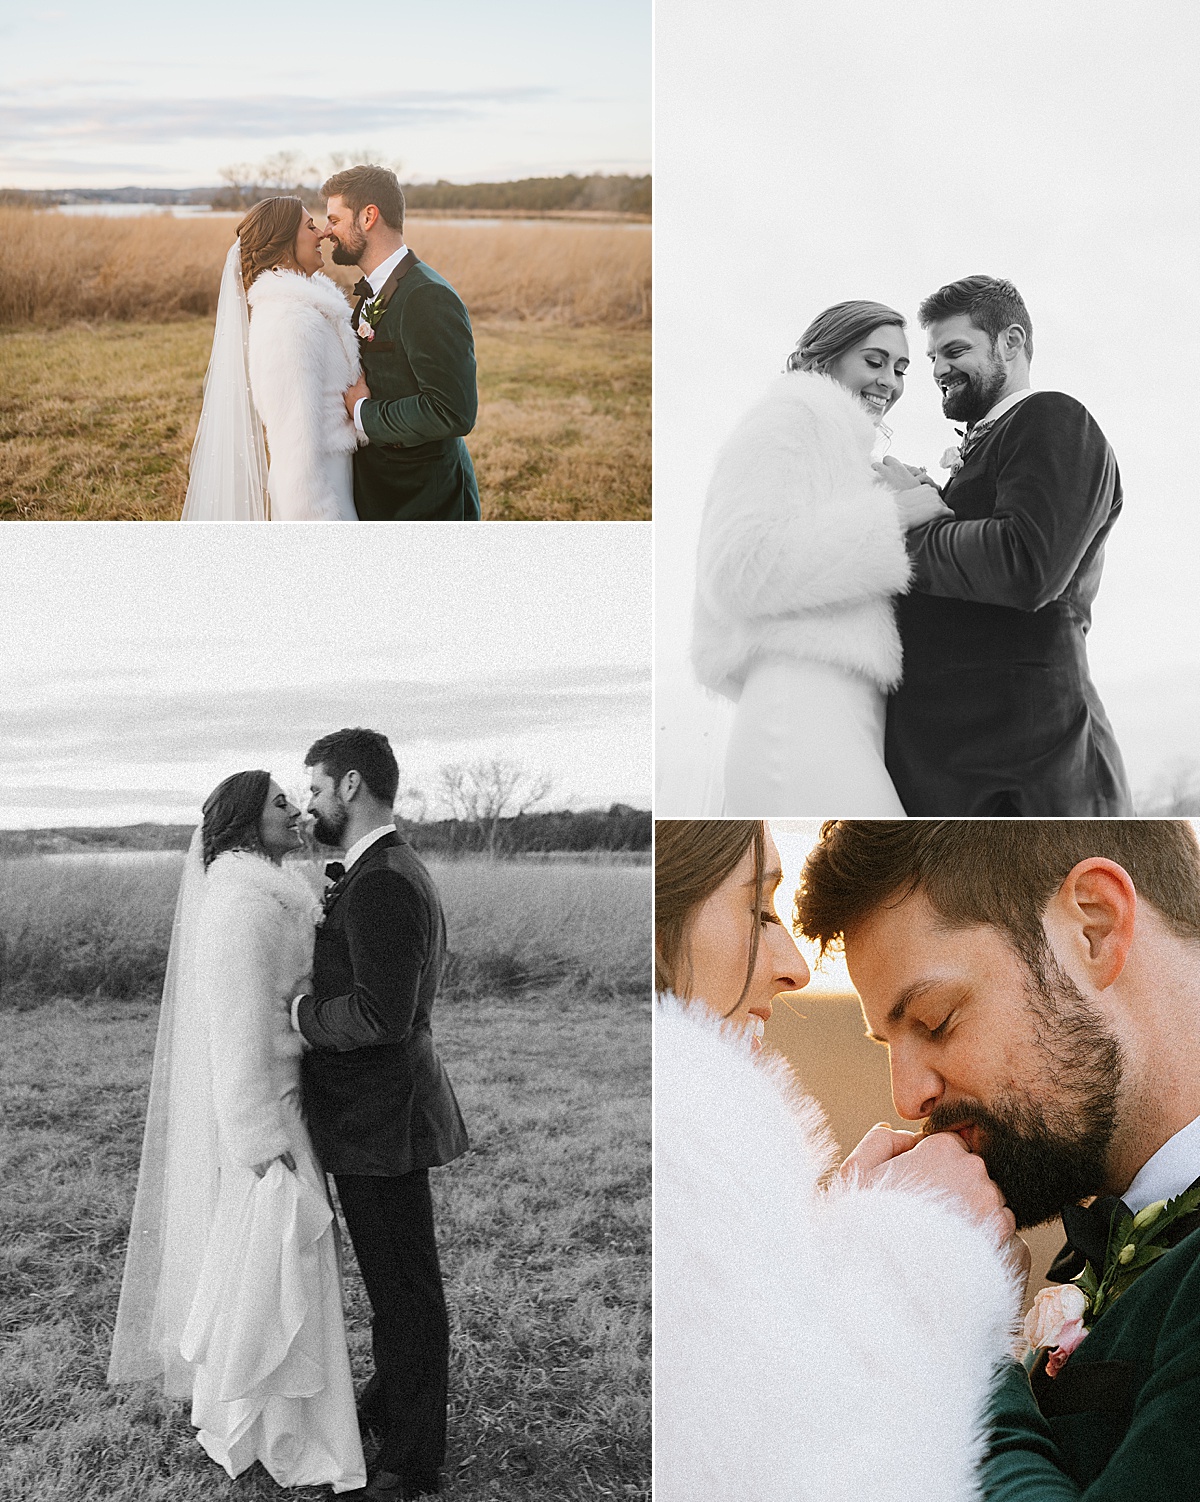 Romantic winter wedding bride and groom portraits at Marblegate Farms.